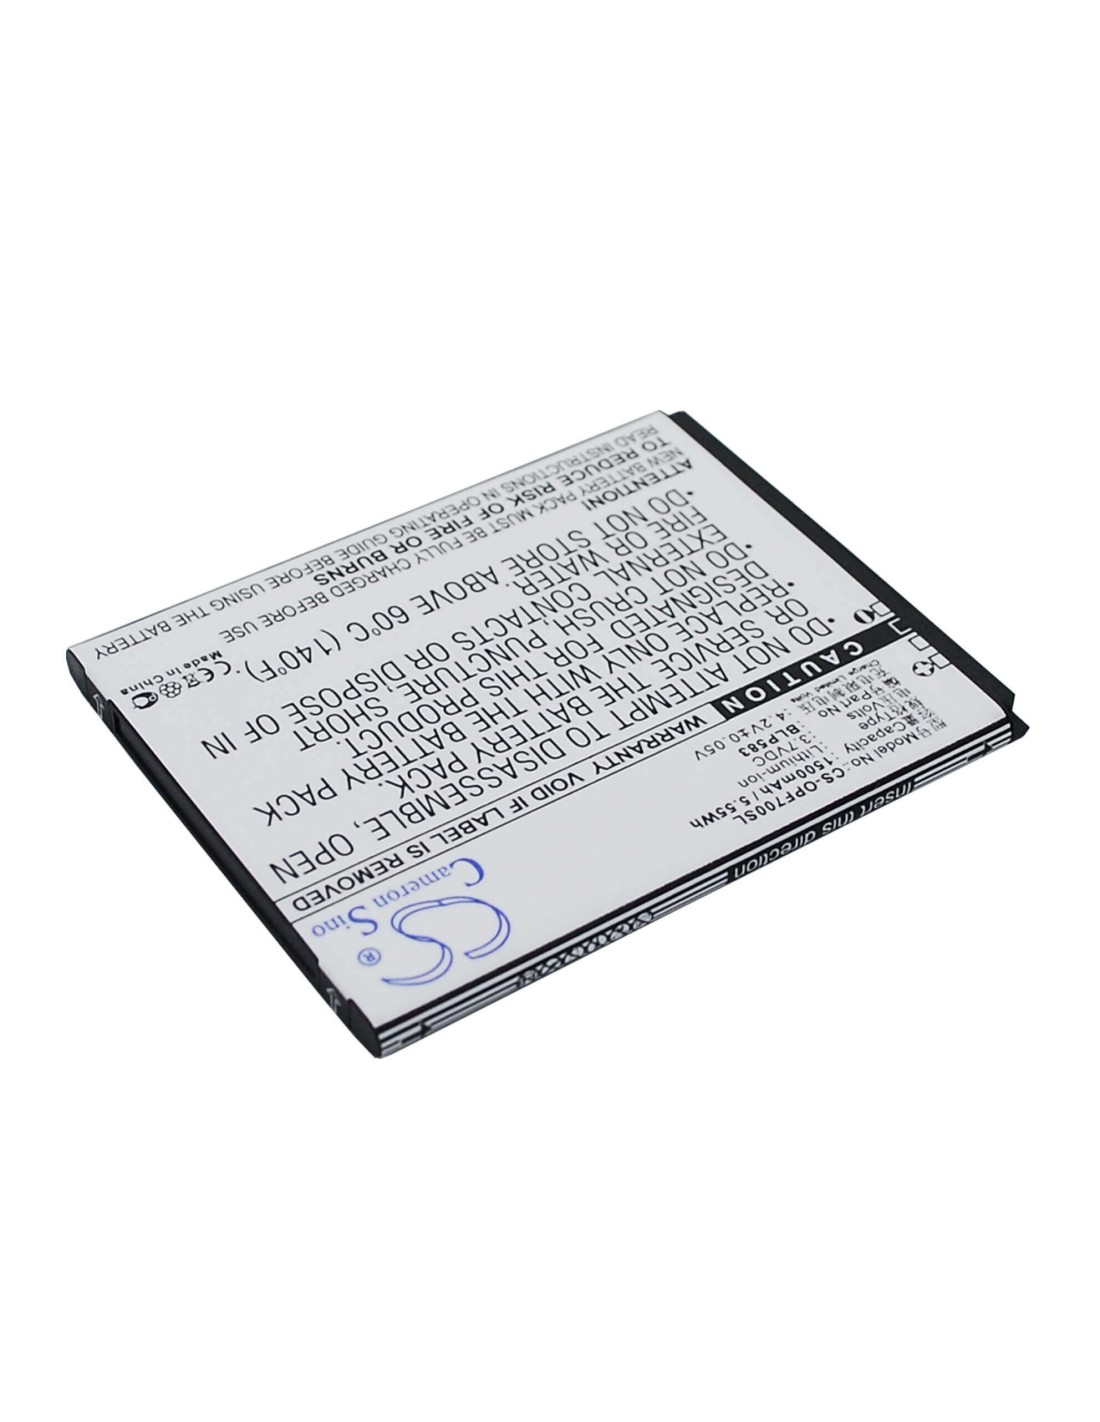 Battery for OPPO 1105, 1107, Find 7 Dual SIM 3.7V, 1500mAh - 5.55Wh